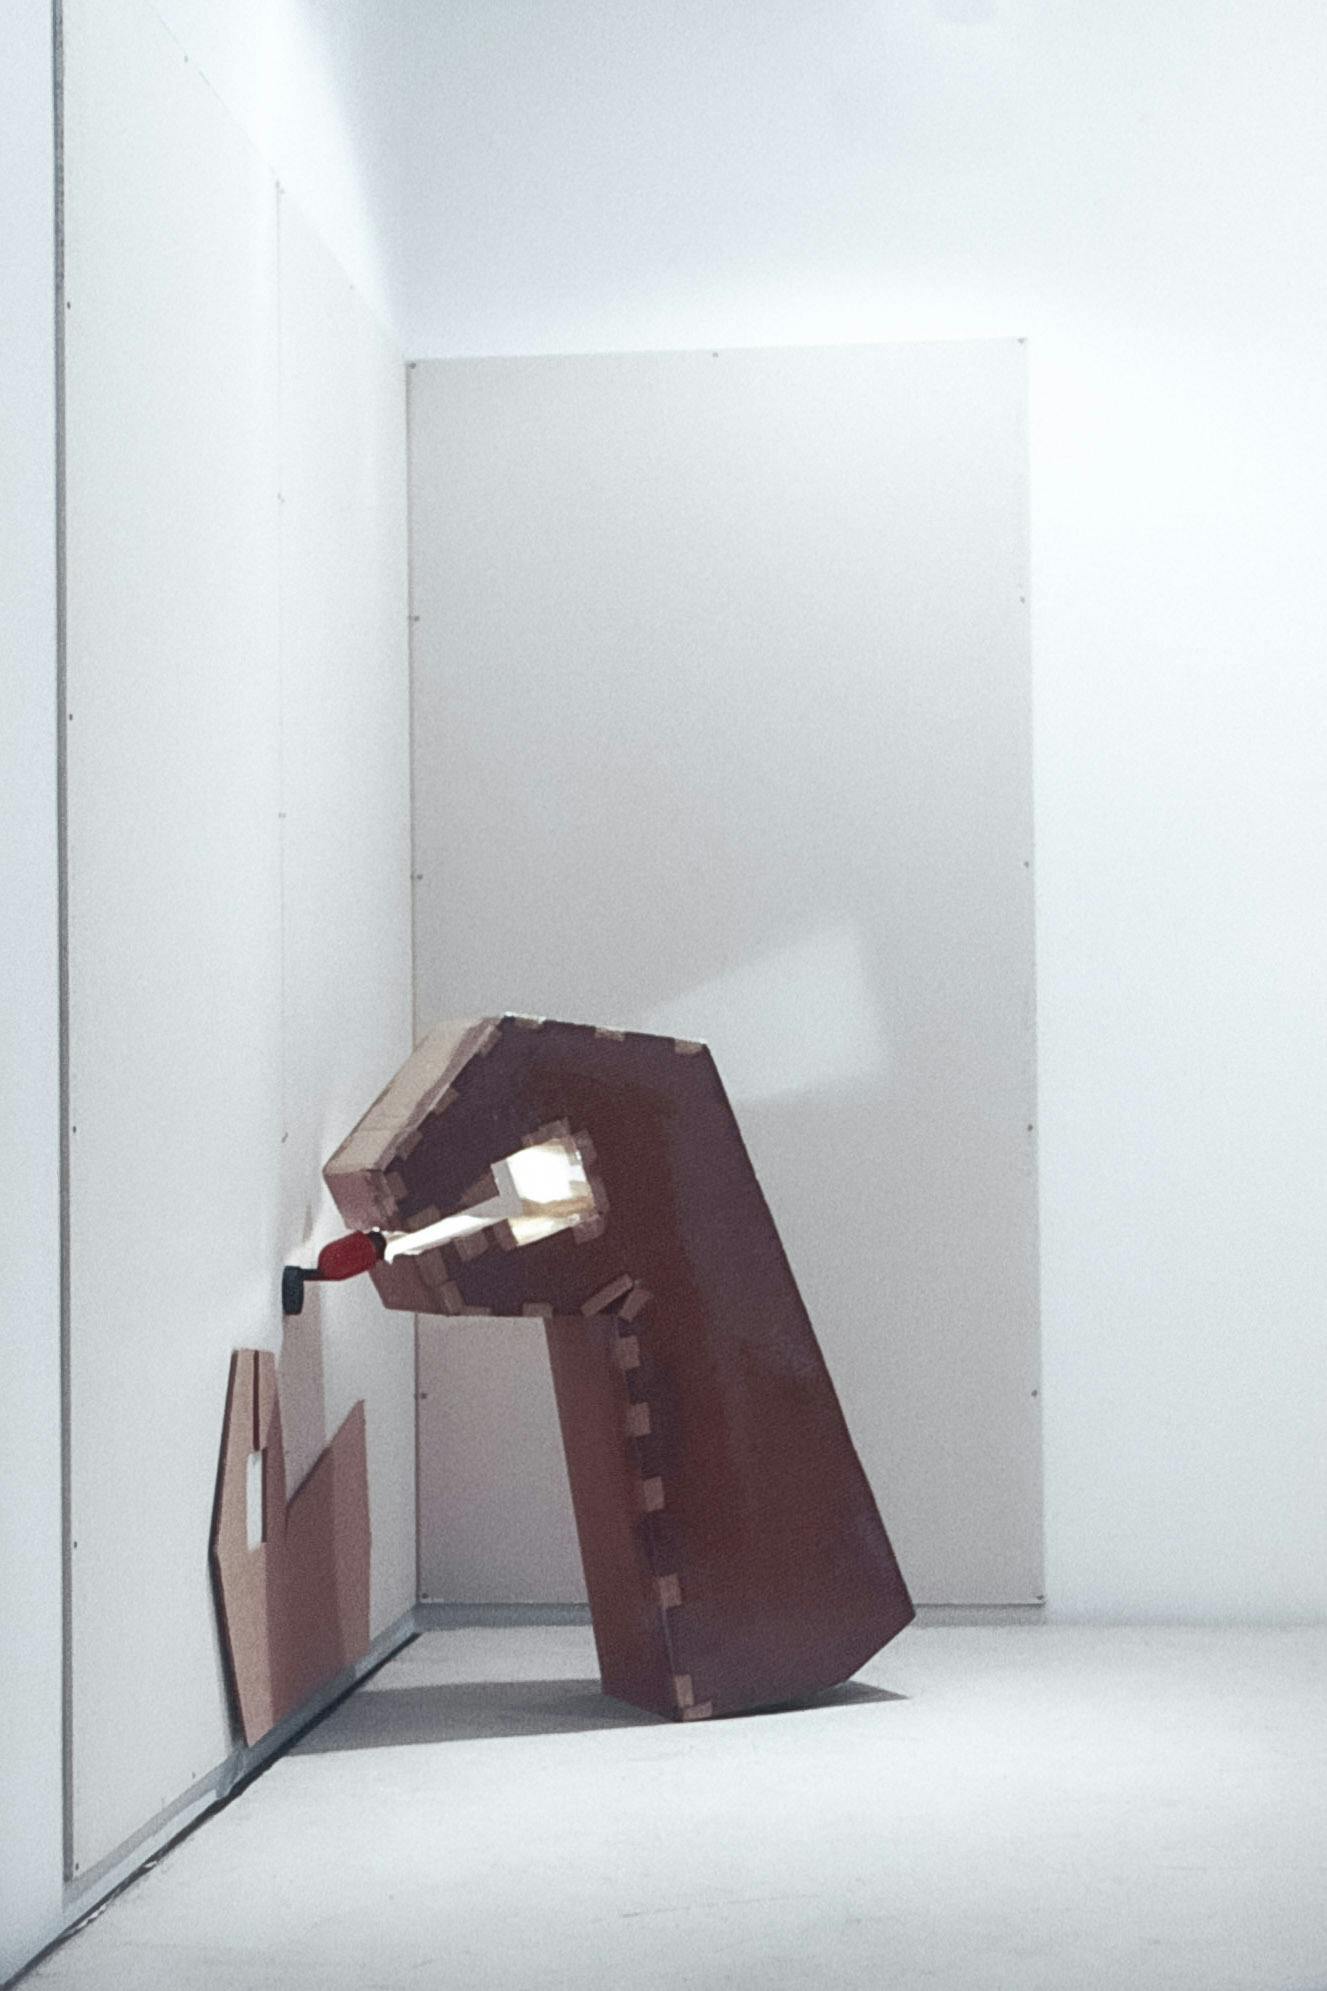 The corner of a gallery with white floors and walls. There are 3 grey panels on the walls. On 1 panel there is a flat, wrench-shaped cardboard piece. This shape is repeated in 3D, leaning on the wall. 